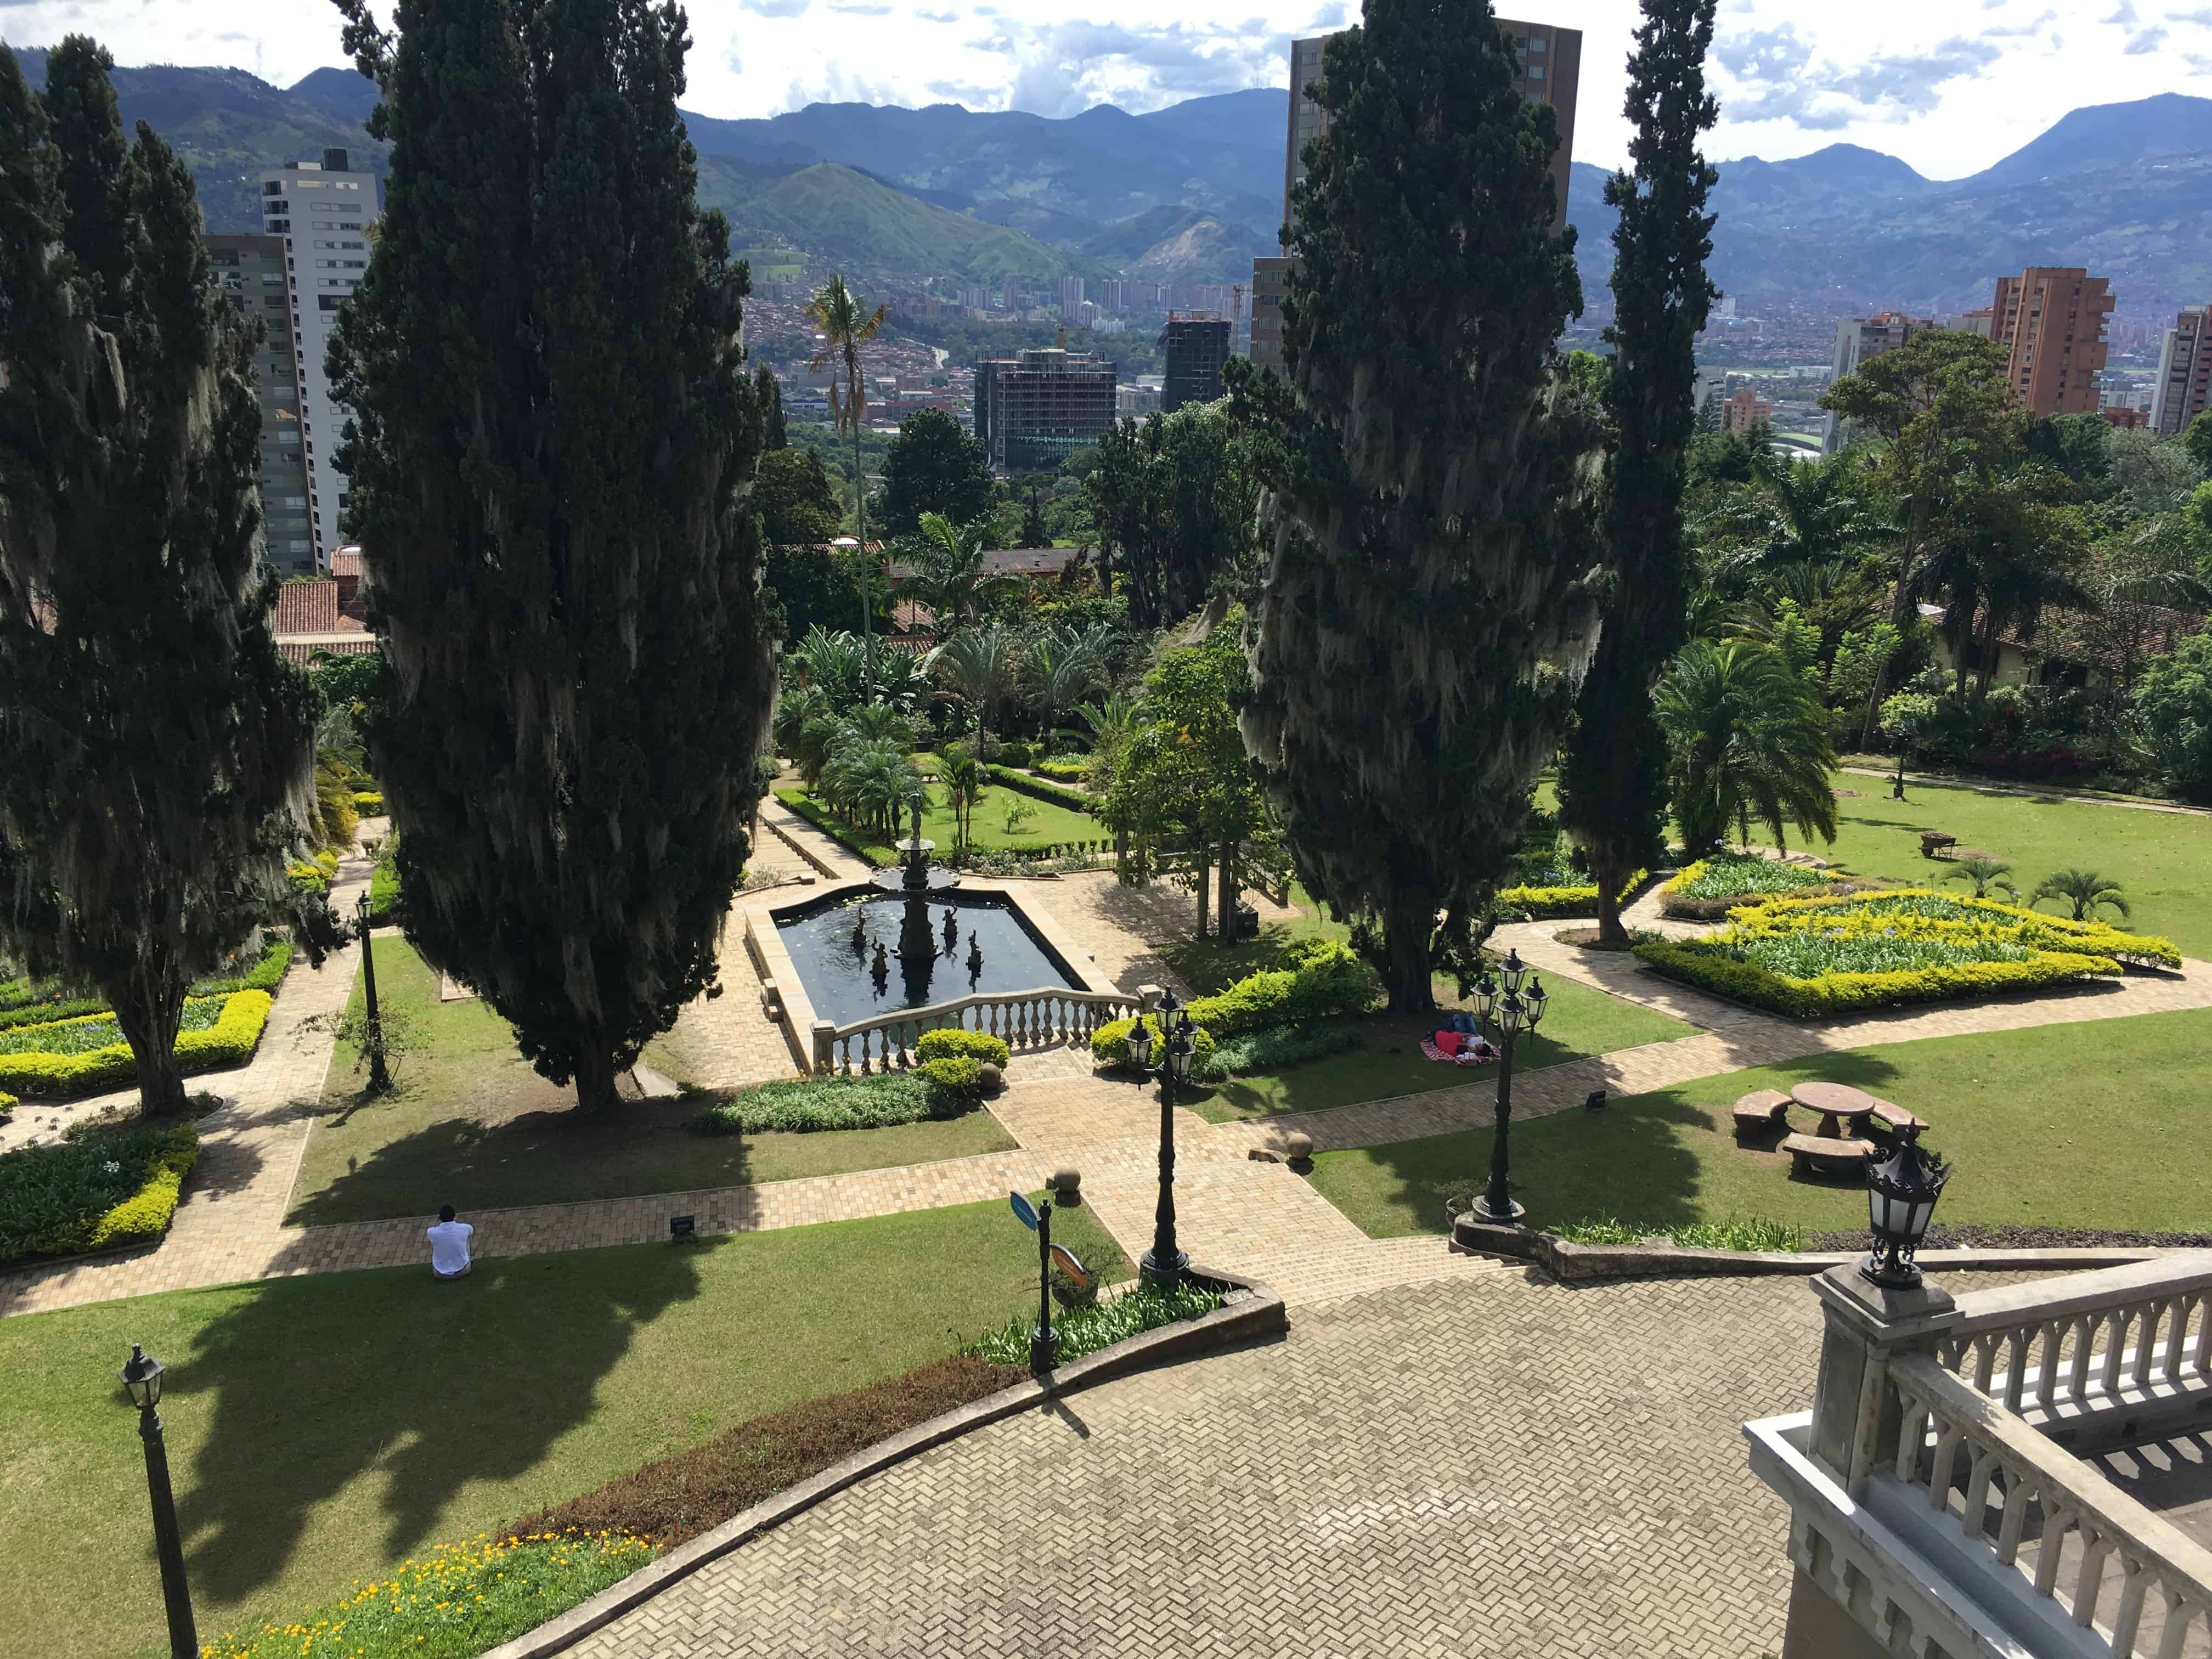 Garden in front of the mansion at the El Castillo Museum in Medellín, Antioquia, Colombia